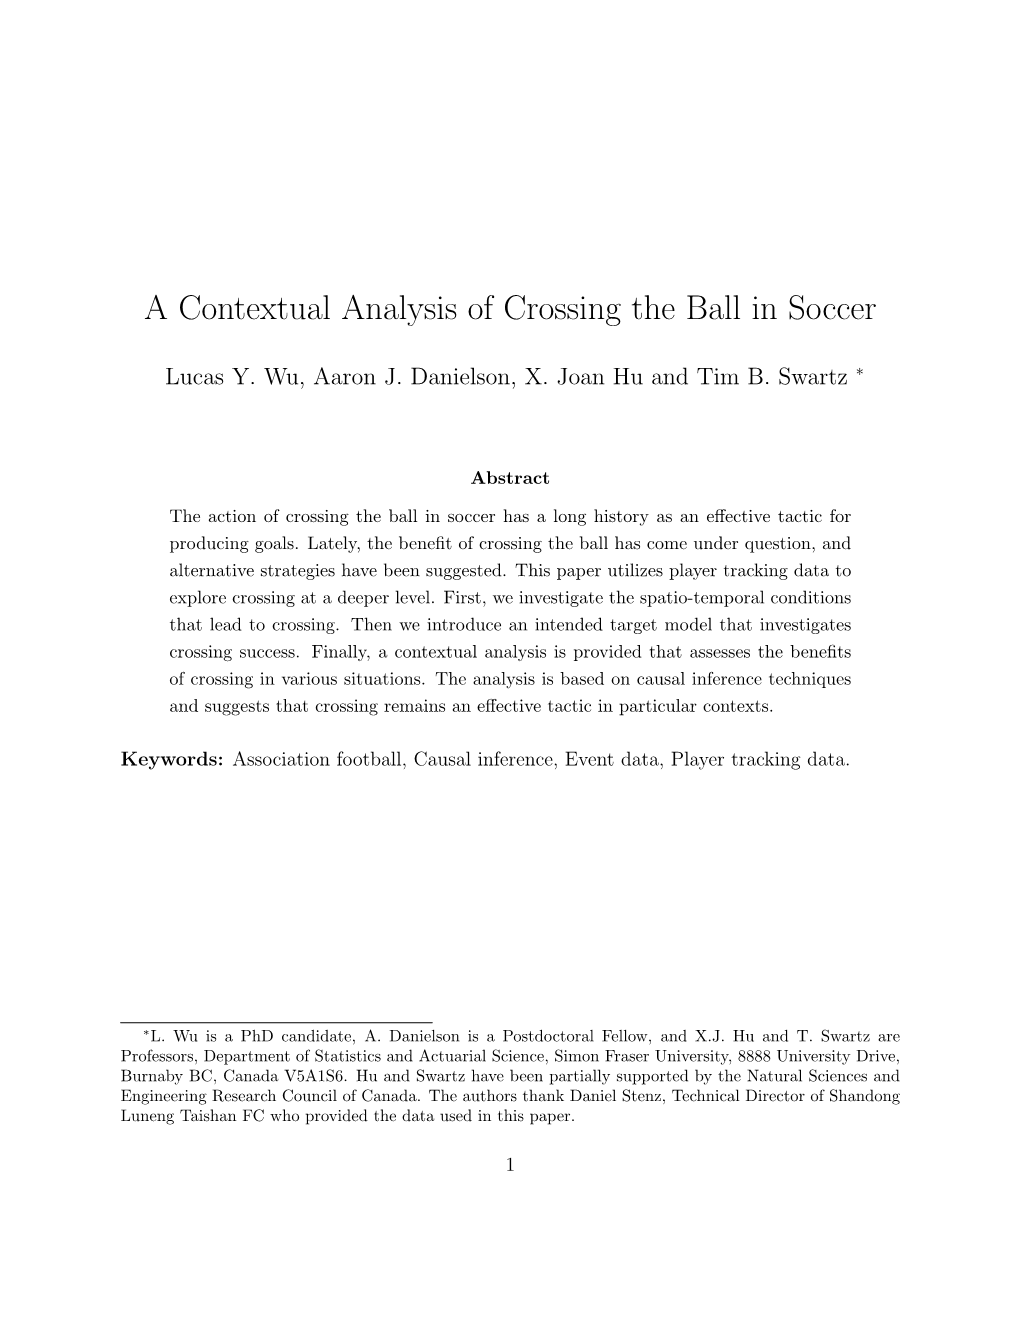 A Contextual Analysis of Crossing the Ball in Soccer